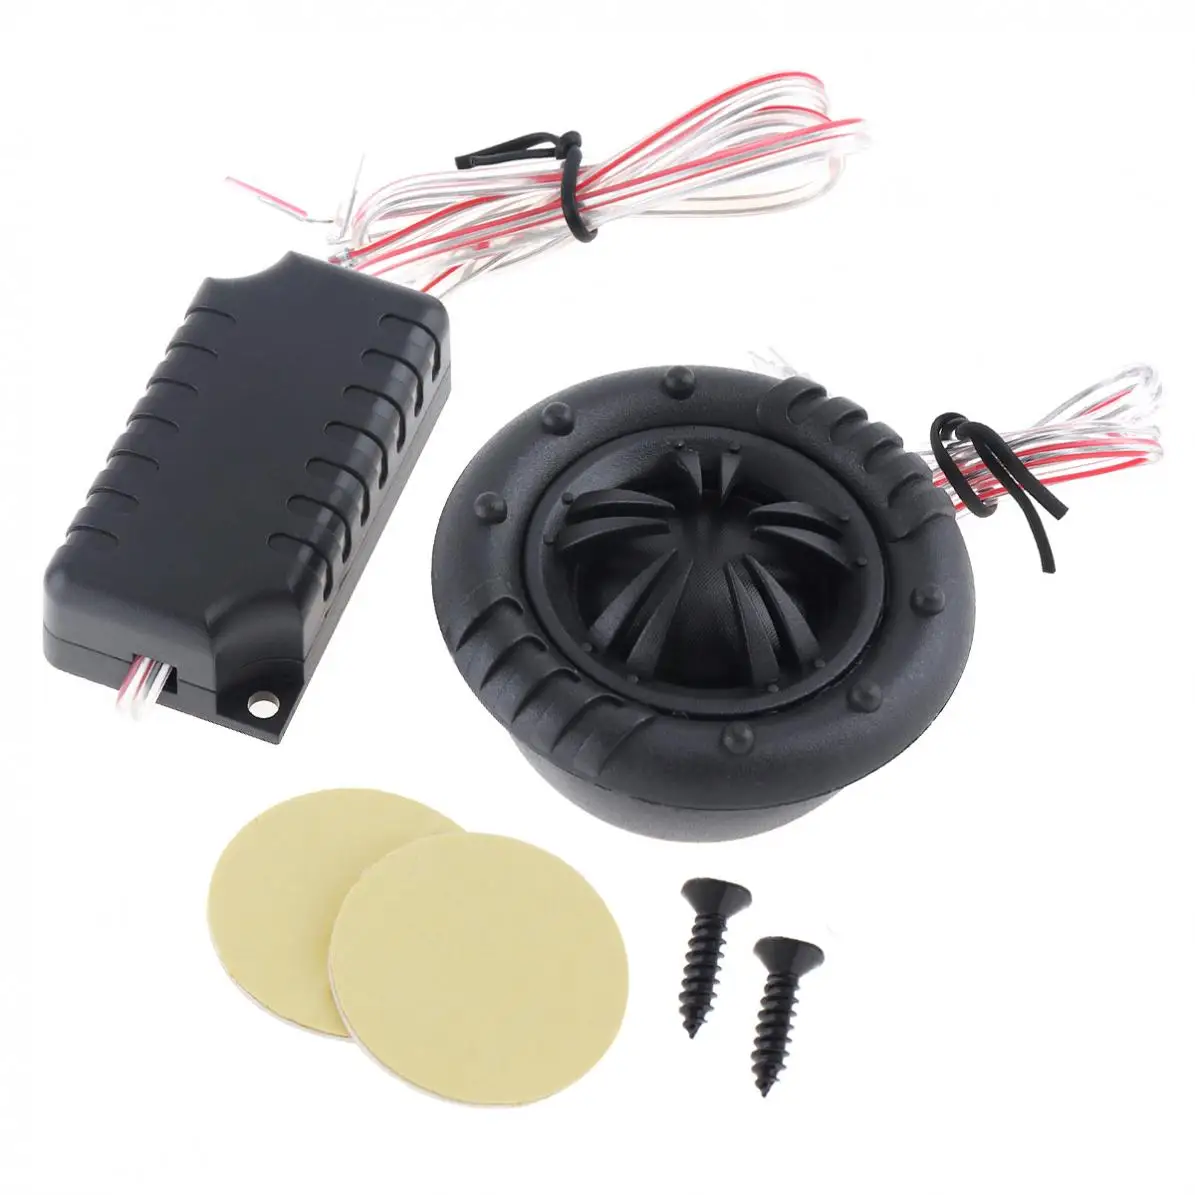 

2pcs 150W YH-X6 High Efficiency Durable 29mm Mylar Half-Dome Tweeter Speakers Built in crossover for Car Audio Systems